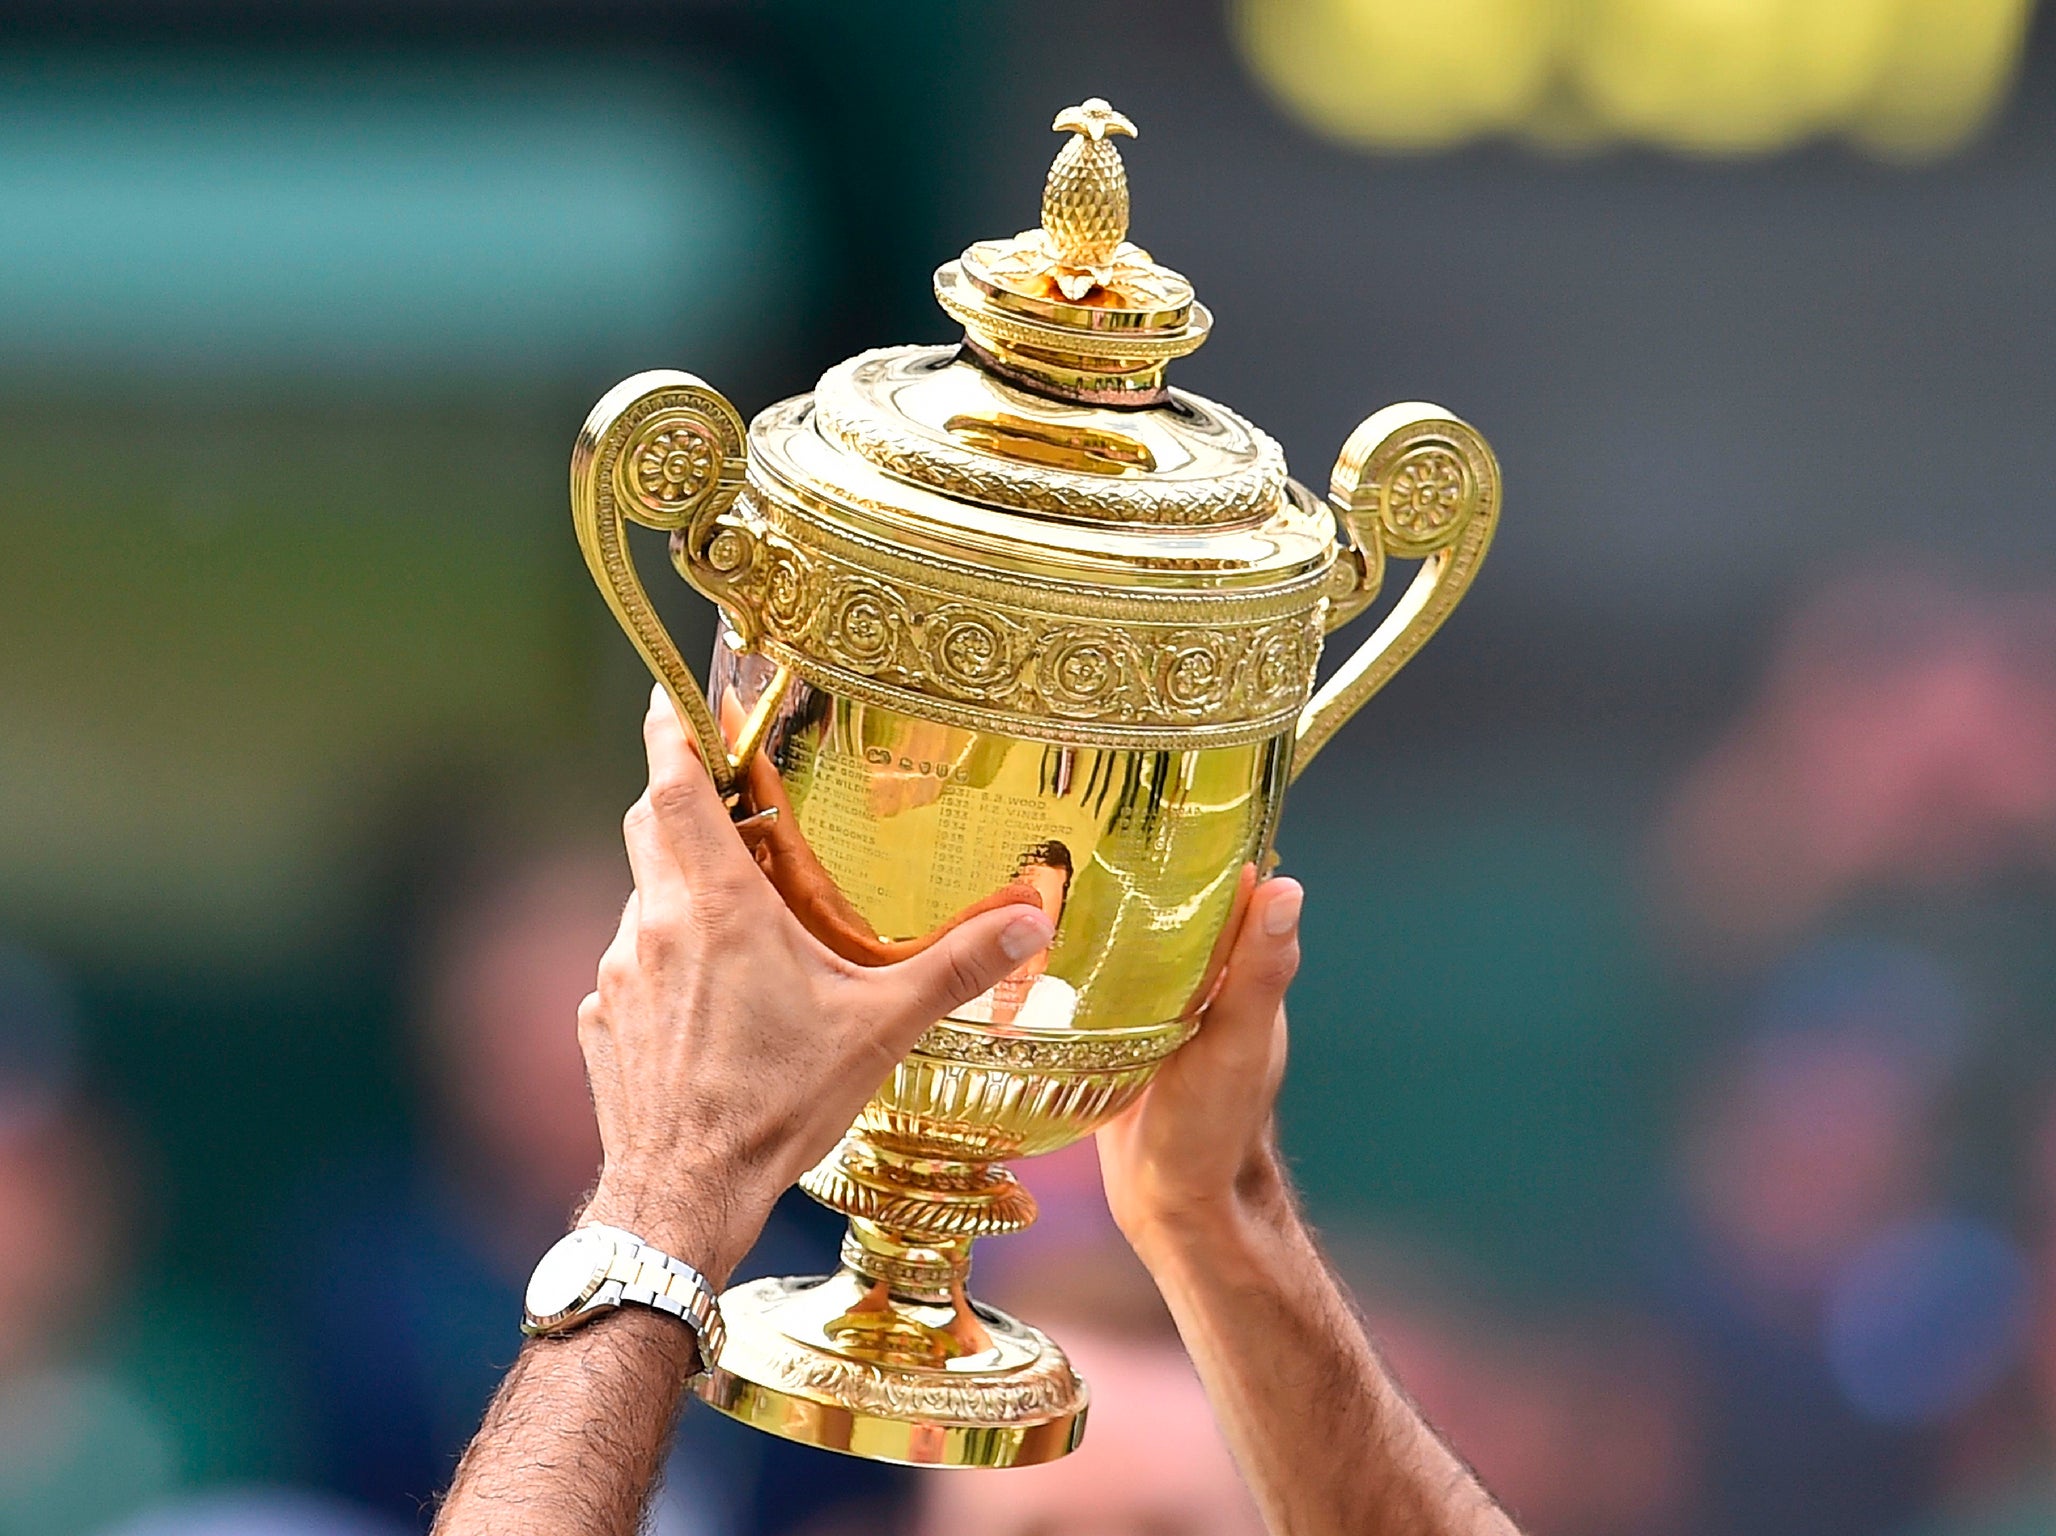 Wimbledon prize money has been increased